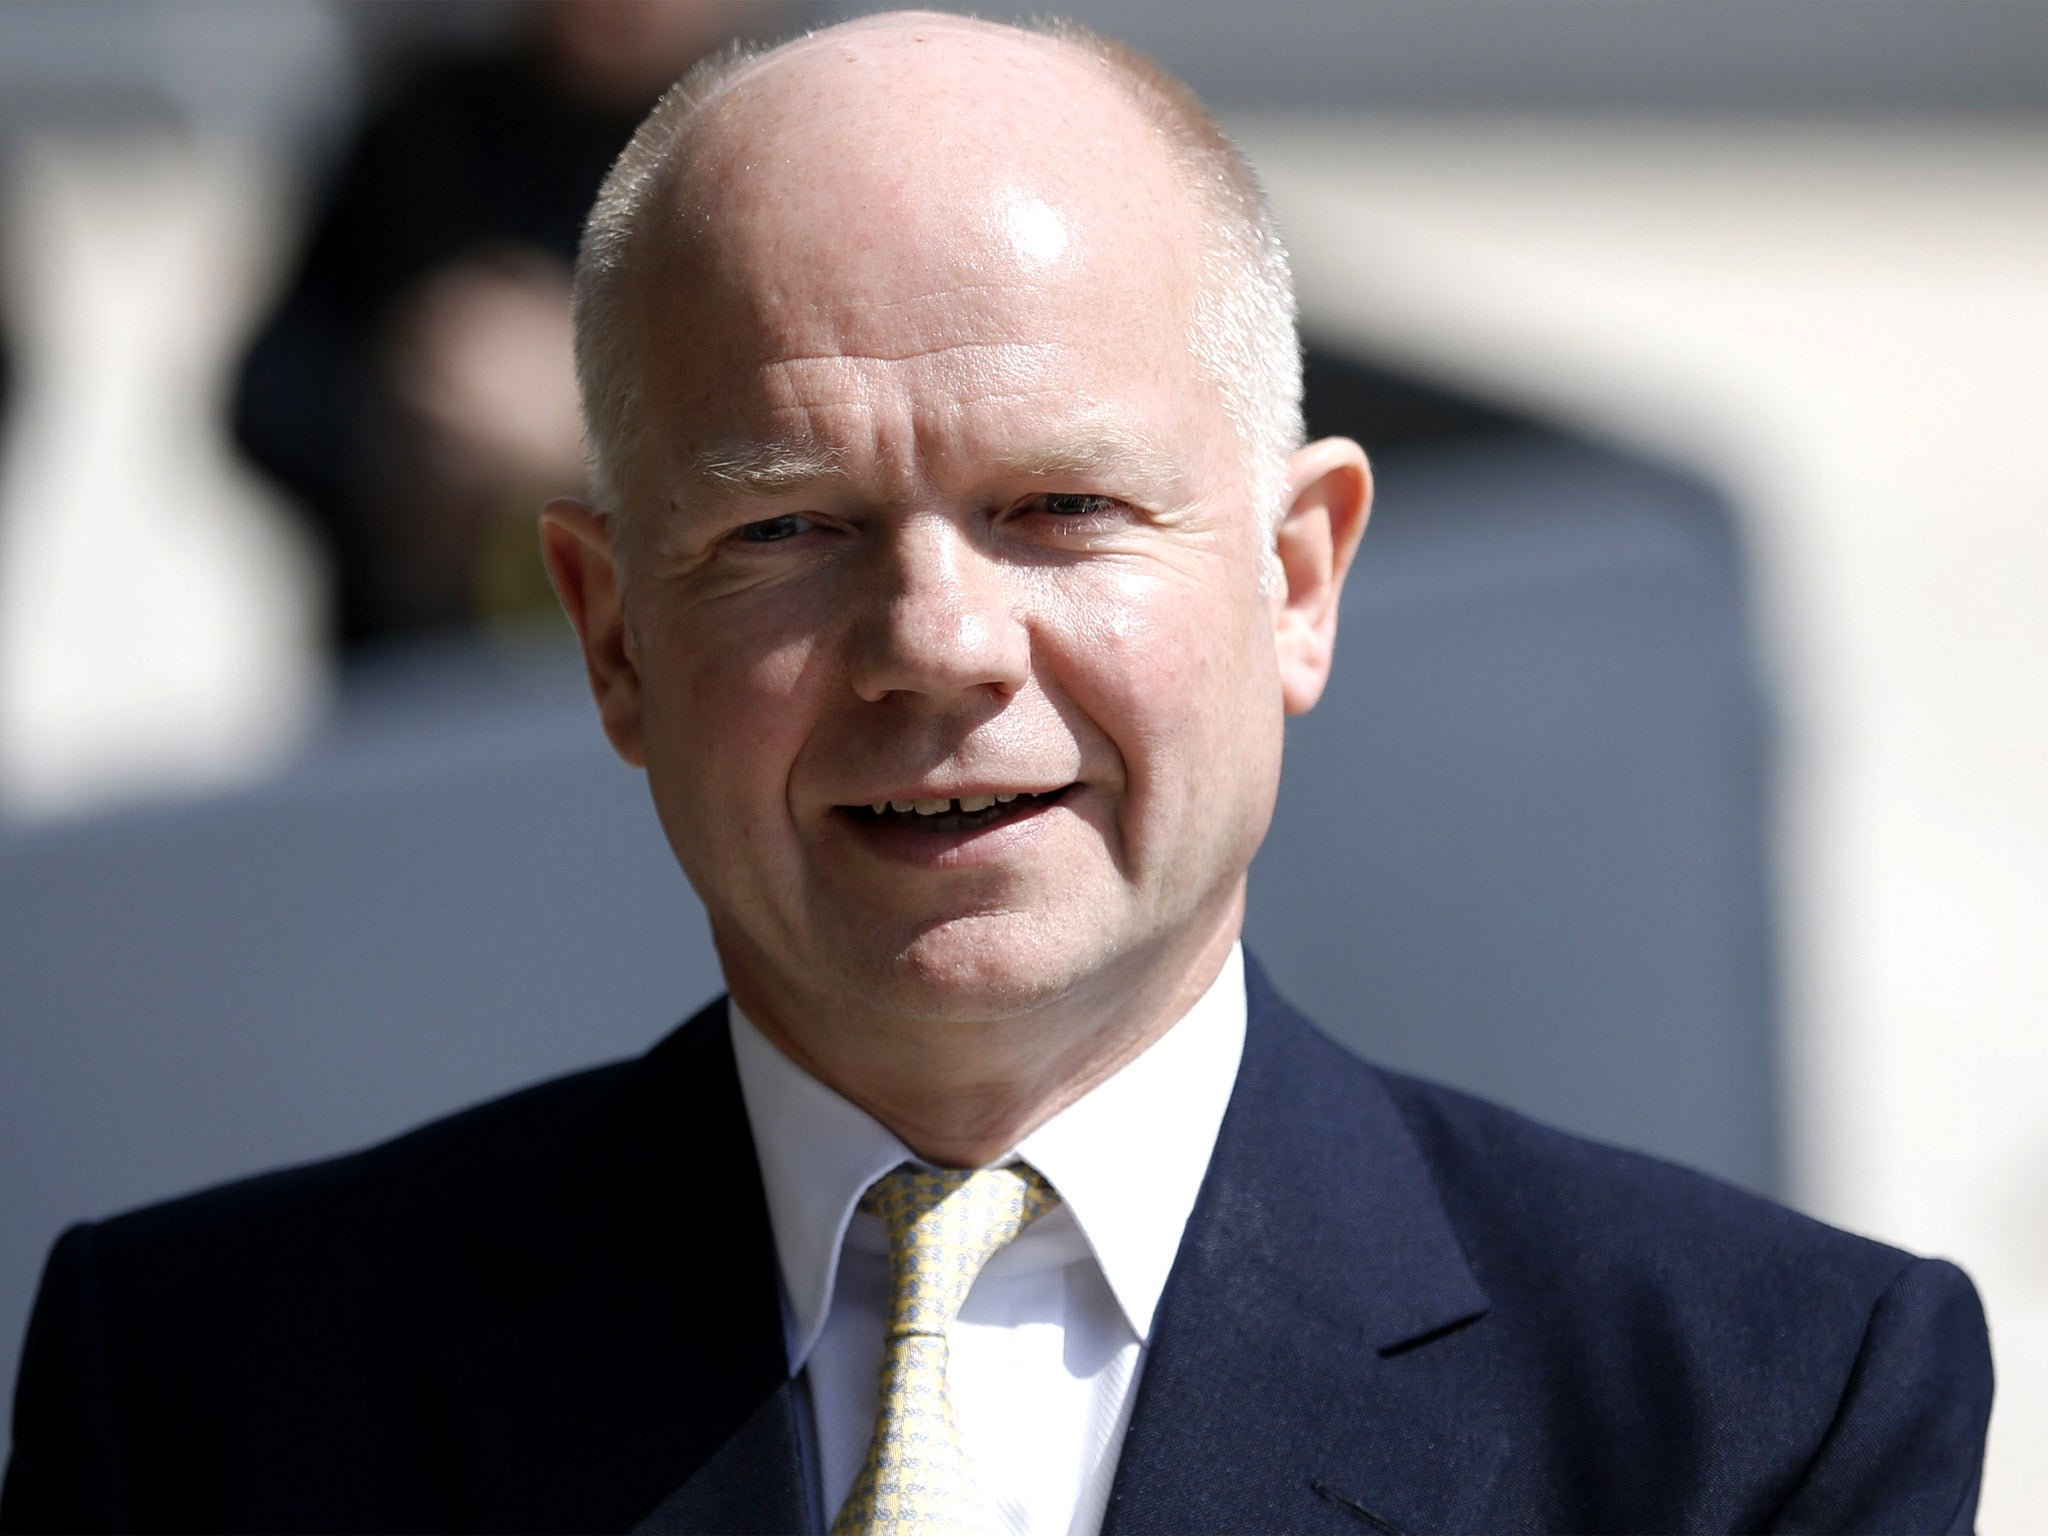 Britain can start arming Syrian rebels straight away but currently there are no plans to do so, Foreign Secretary William Hague said today